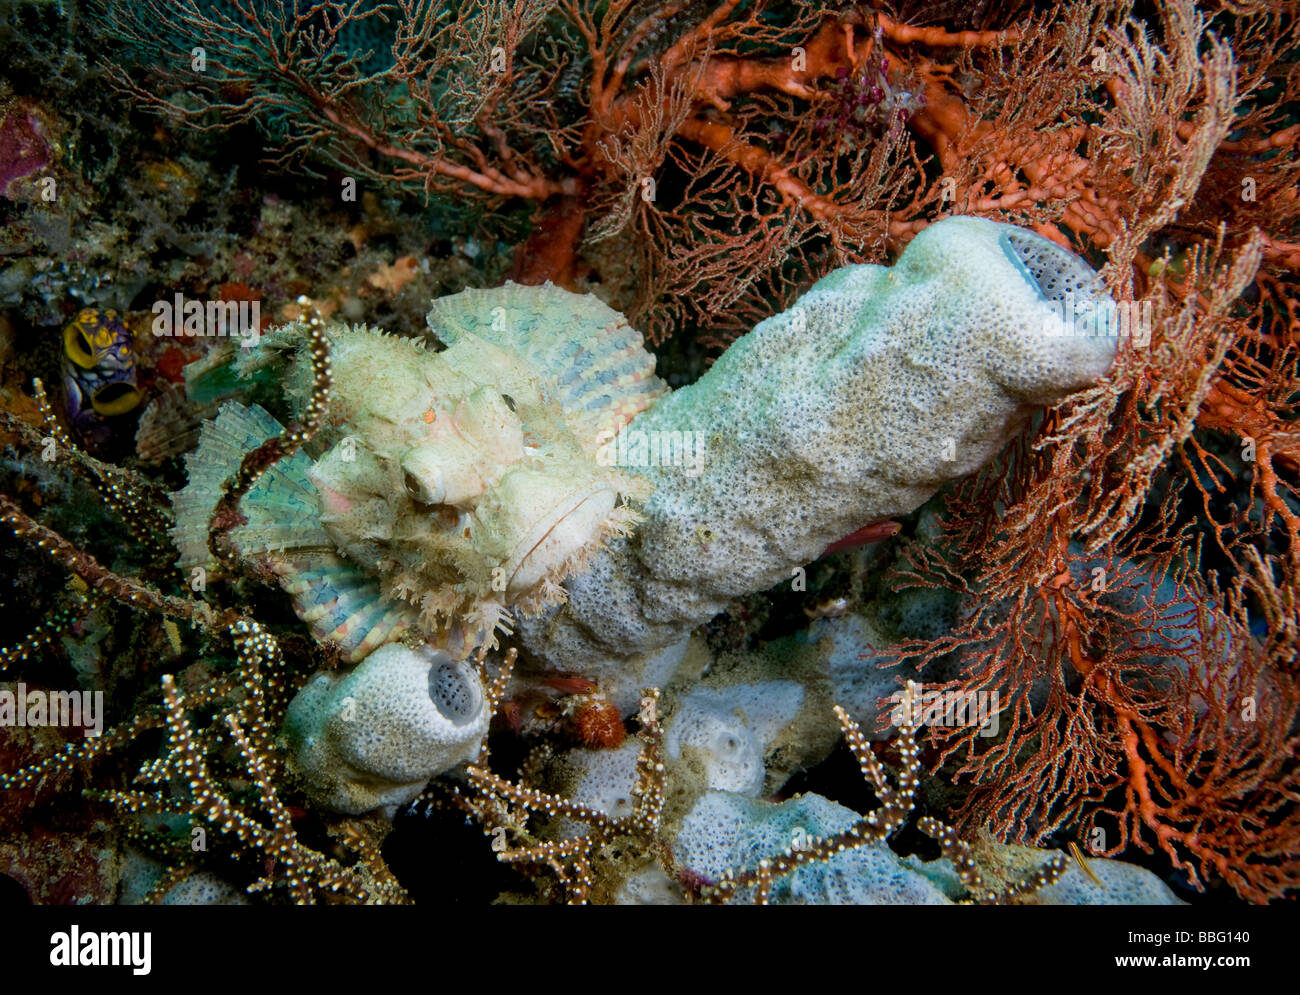 Scorpionfish on coral reef. Stock Photo